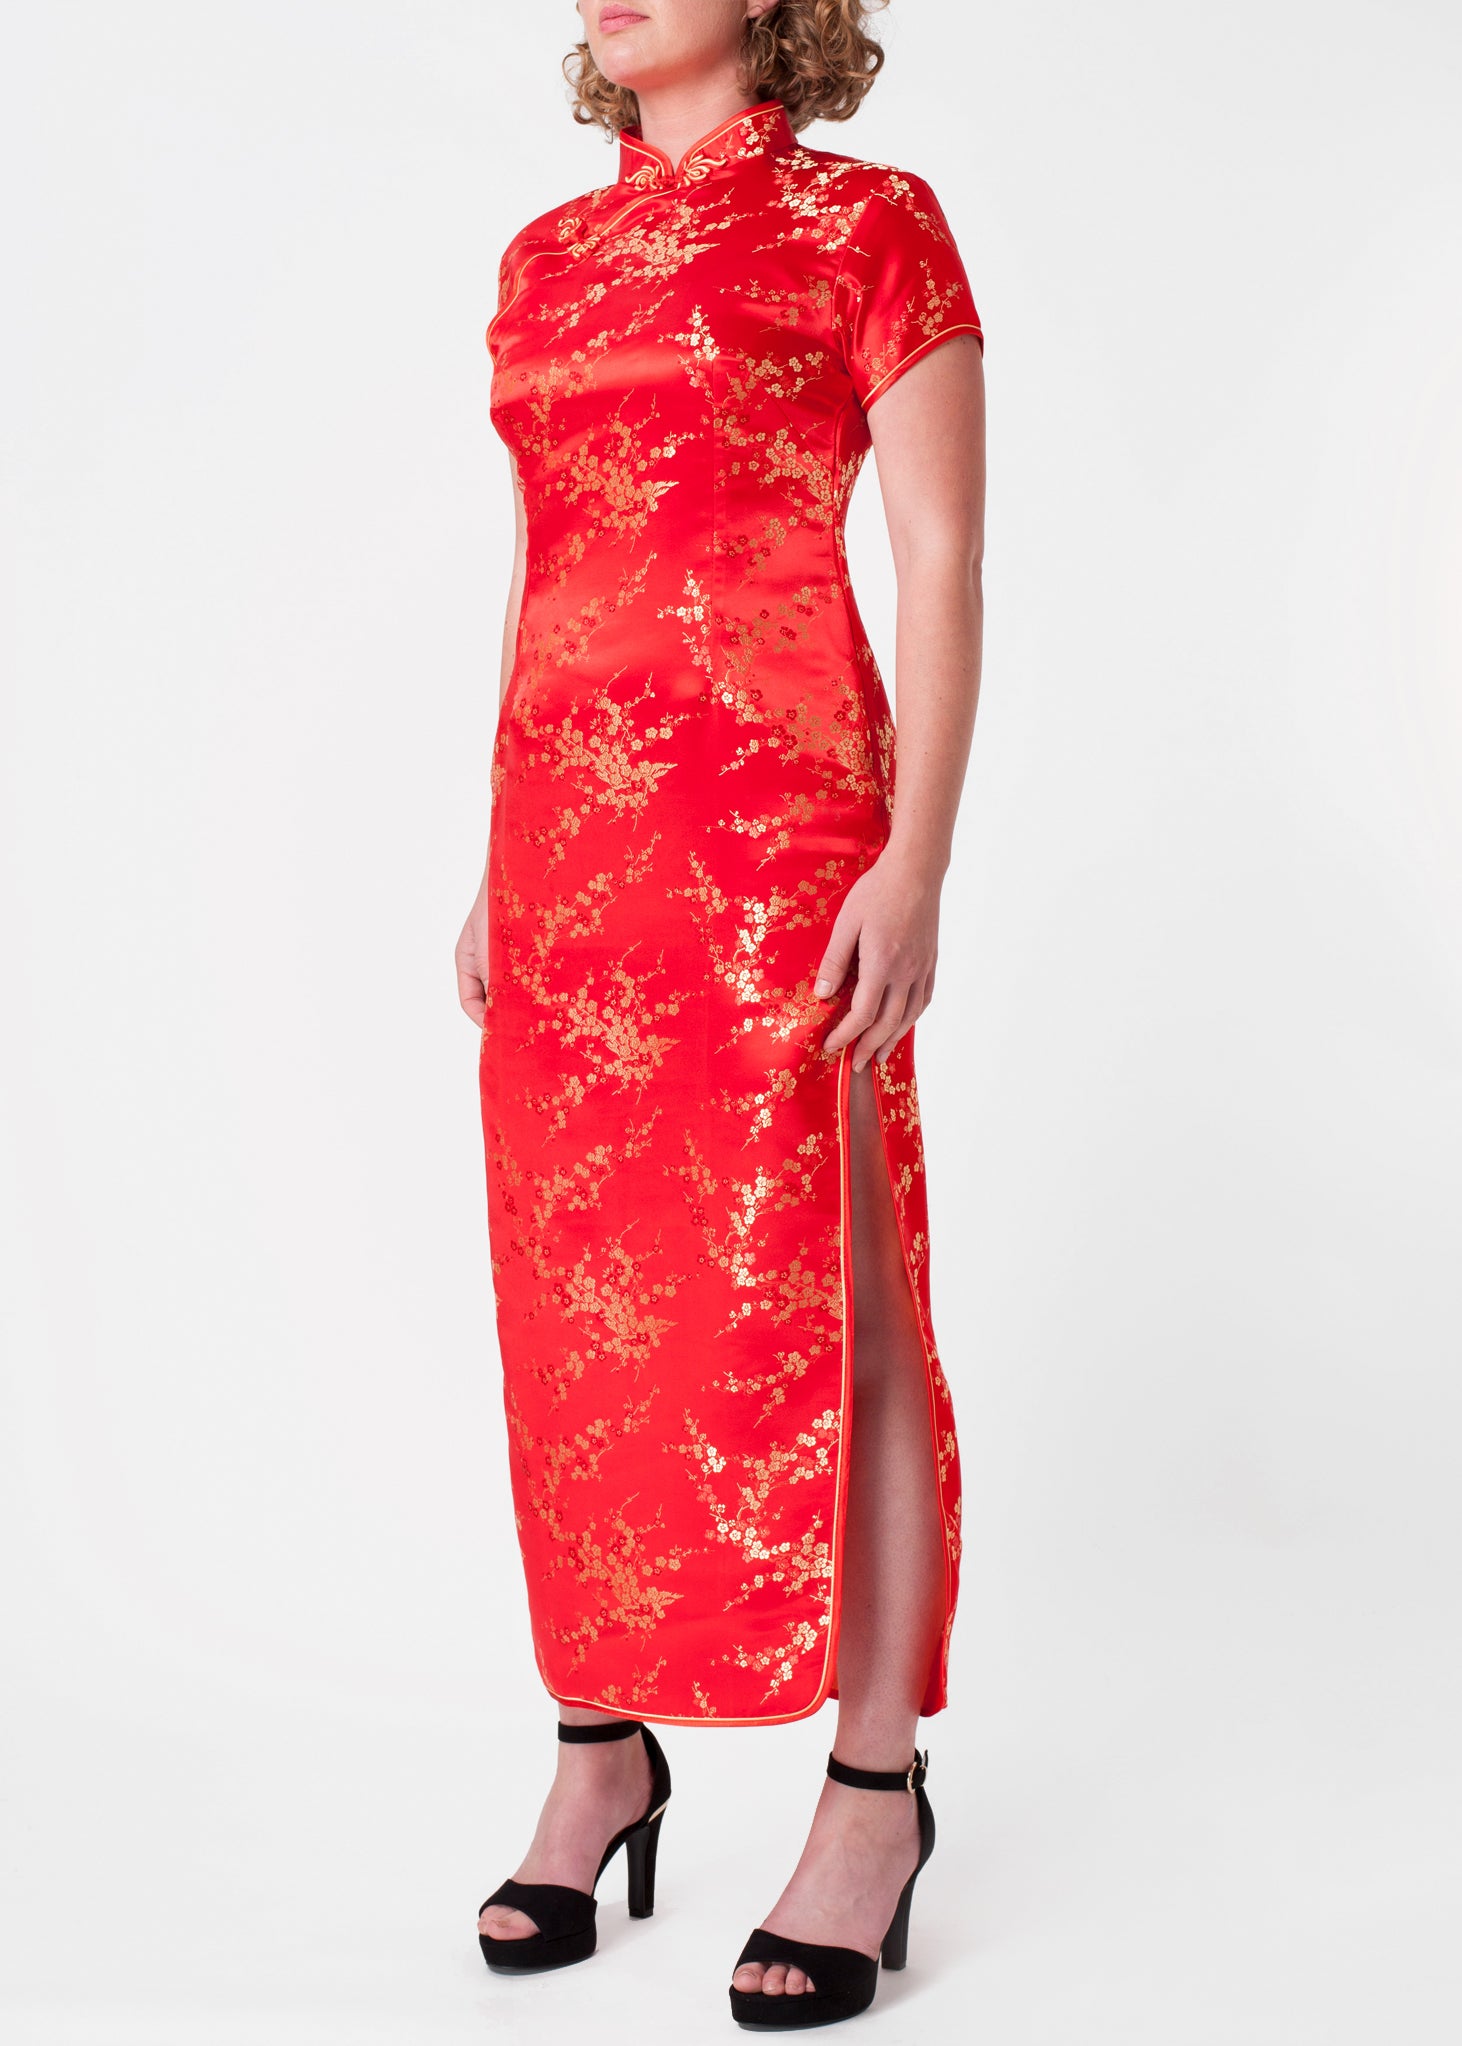 The Cheongsam or Qipao, is a feminine body-hugging Chinese style dress with distinctive features of mandarin collar, side splits and hand stitched flower and knot frog fastenings. Manufactured in authentic high quality silk/rayon brocade in a stunning red with gold cherry blossom design. Quick delivery from UK stock